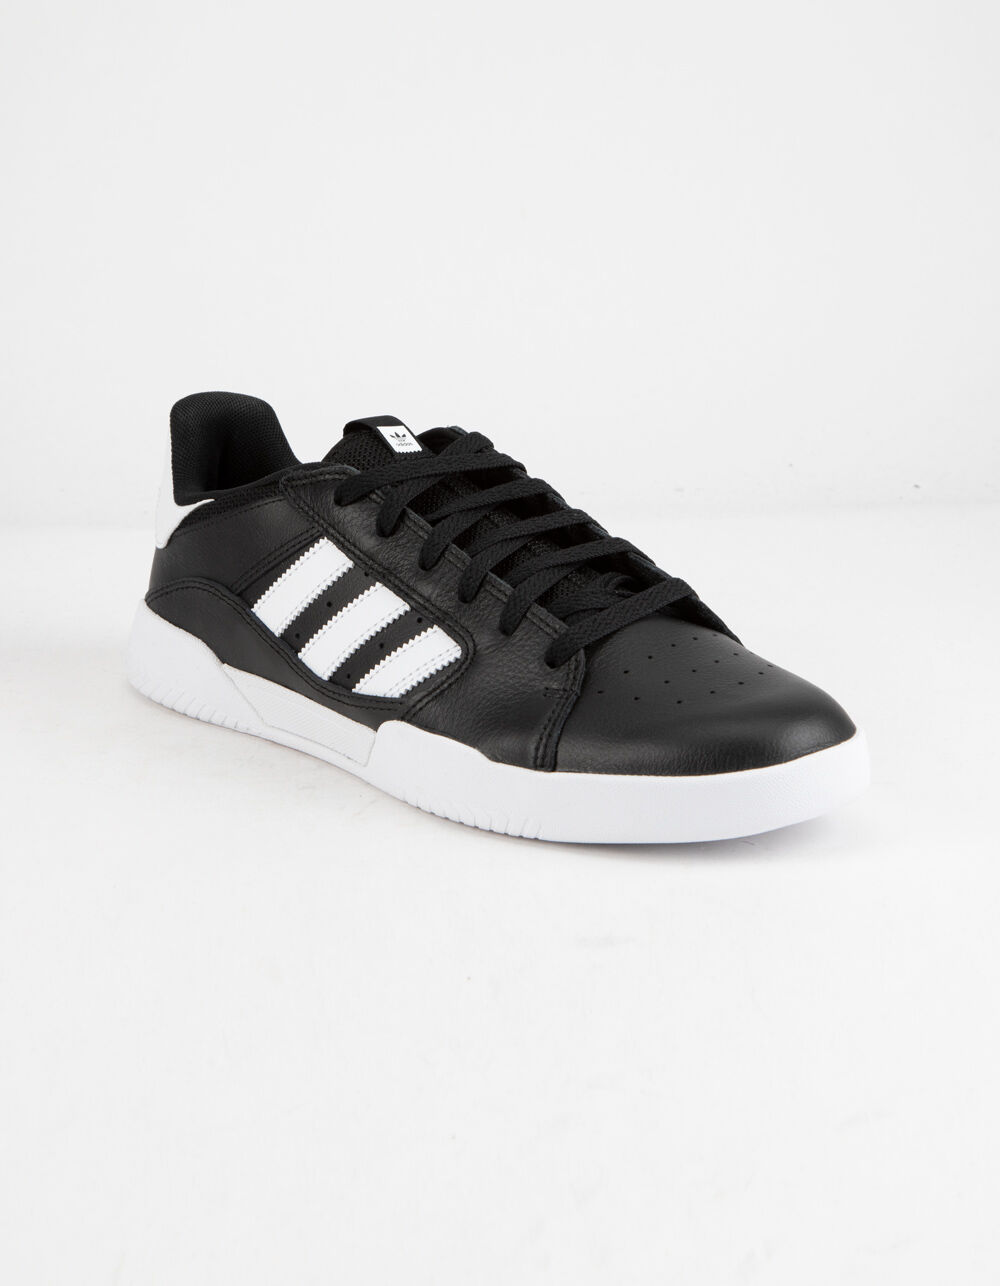 ADIDAS Low Mens Shoes - BLACK/WHITE | Tillys